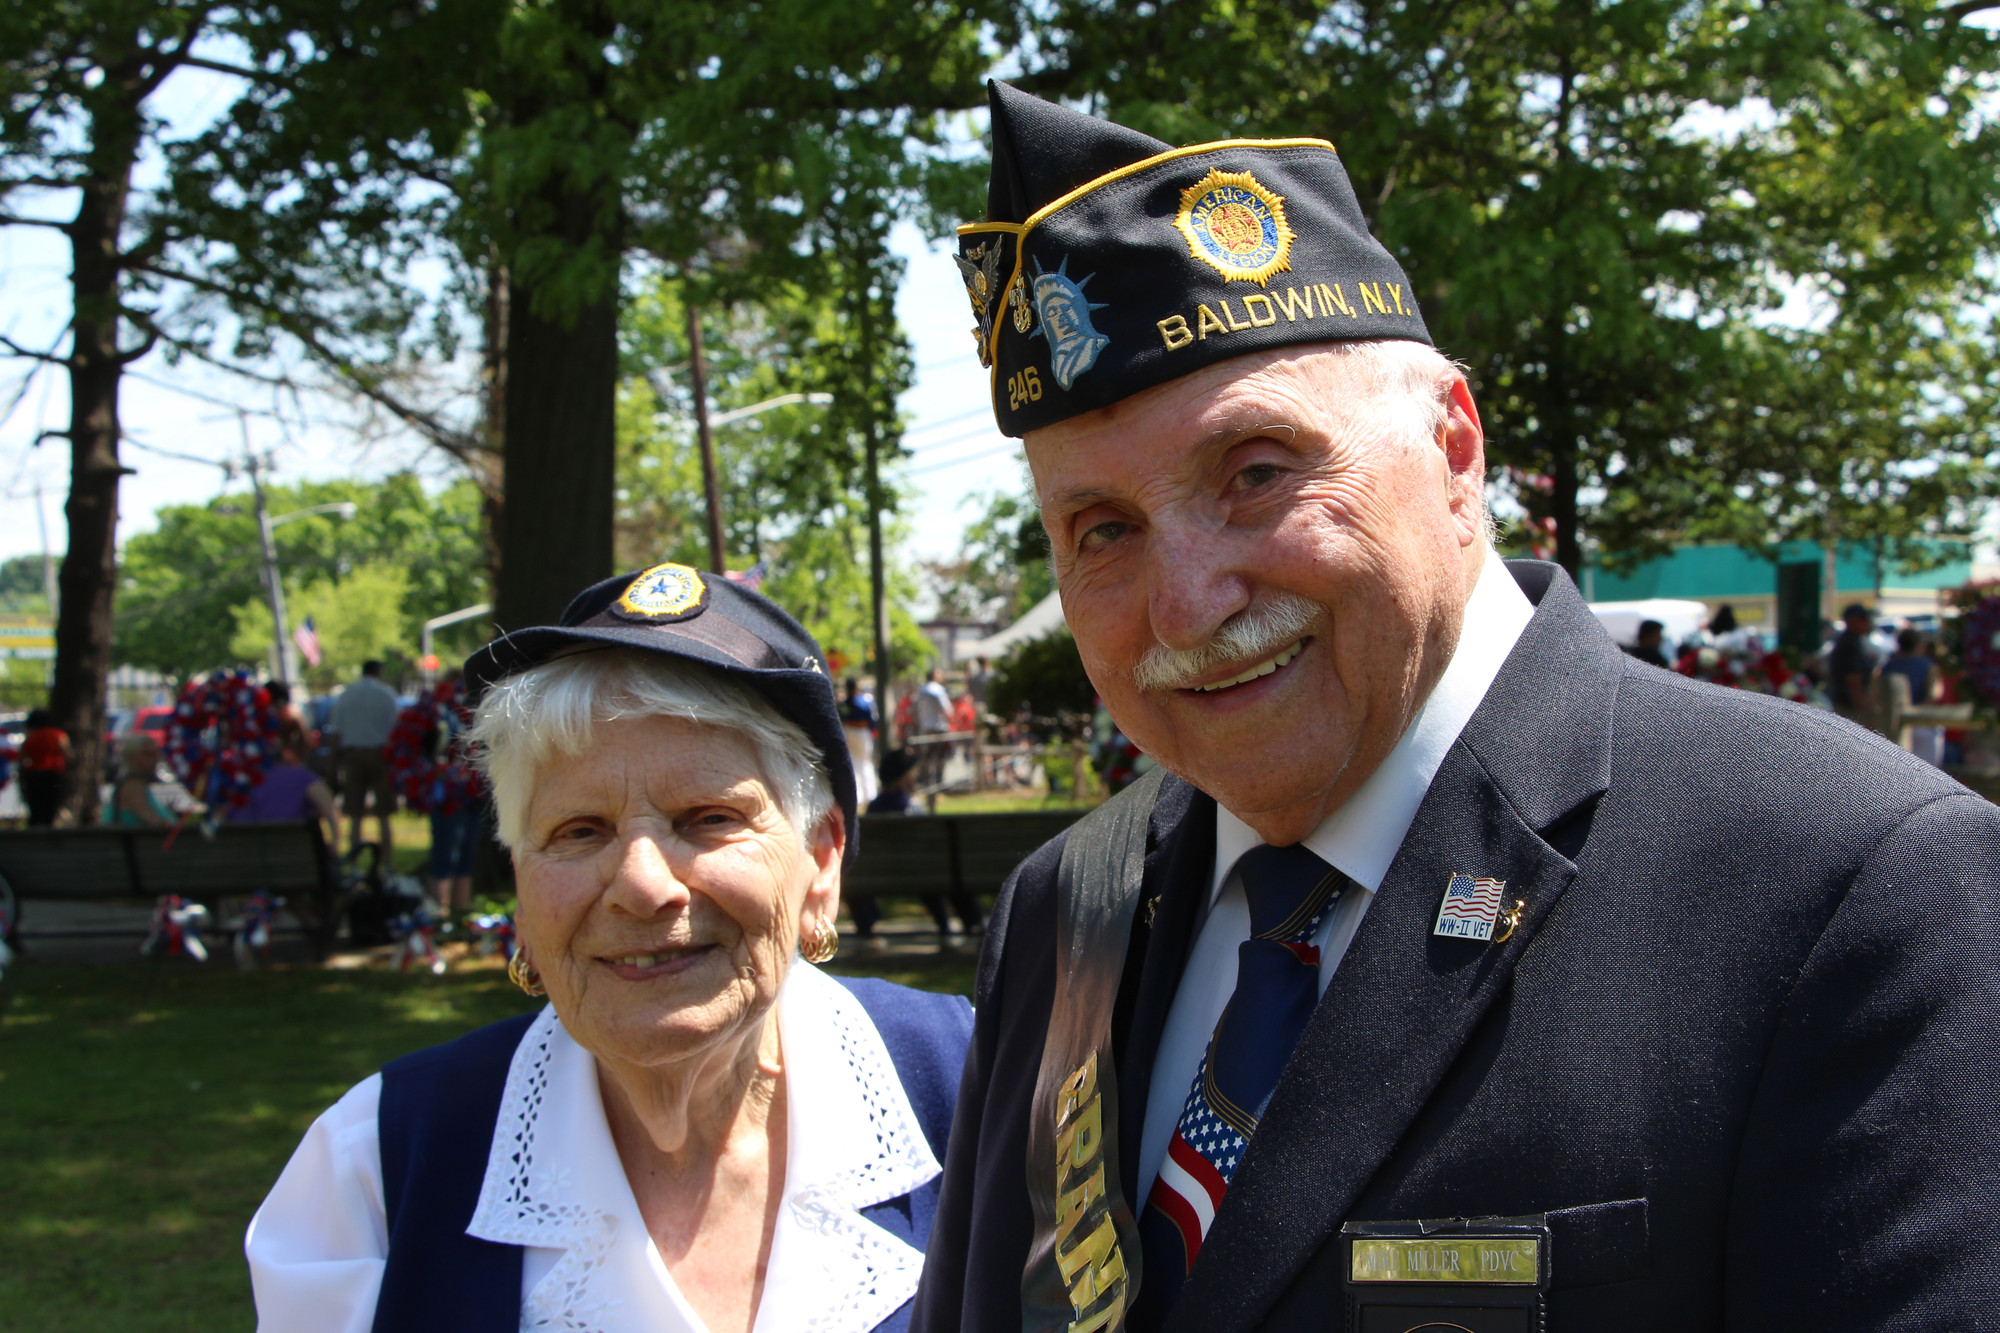 Michael Miller, the parade’s grand marshal, and his wife Ann have been part of Baldwin’s Memorial Day Parade for years.